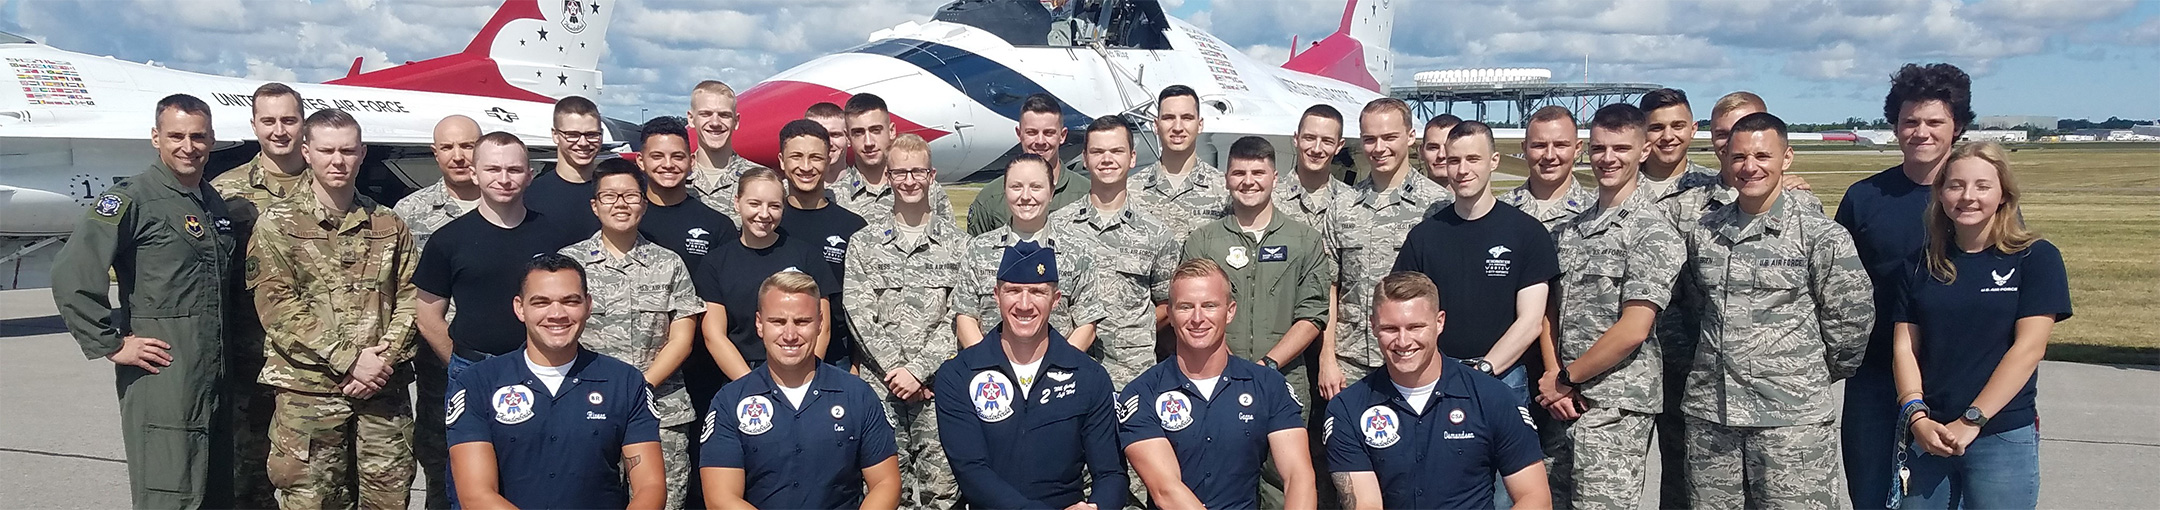 Air Force ROTC members posing in front of 2 jets.